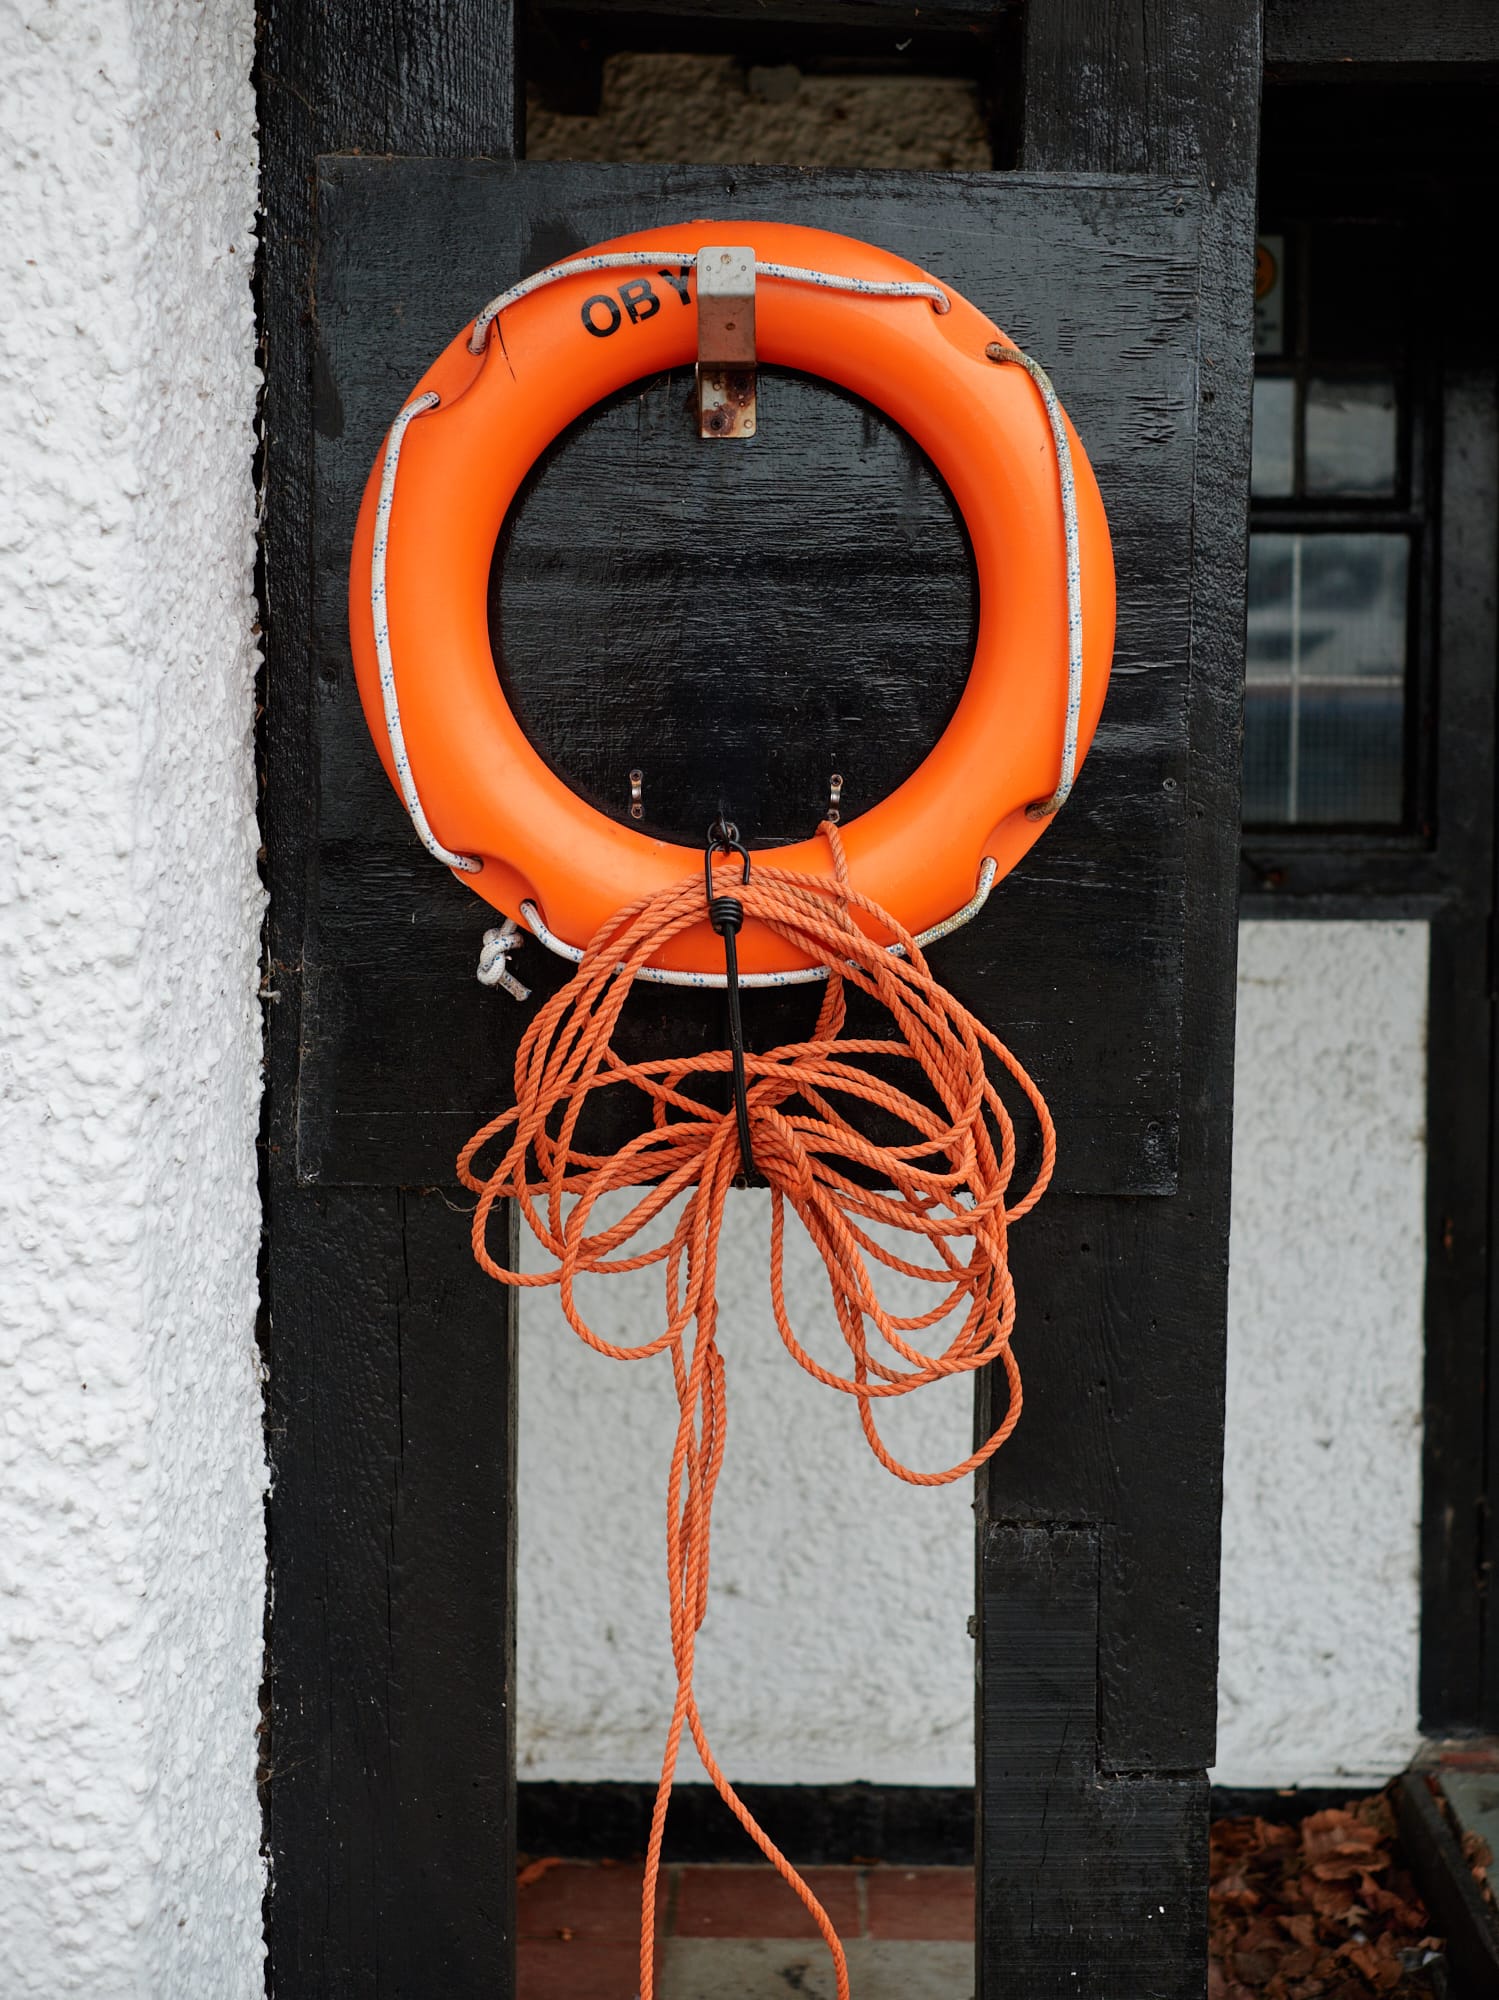 life ring on a hook